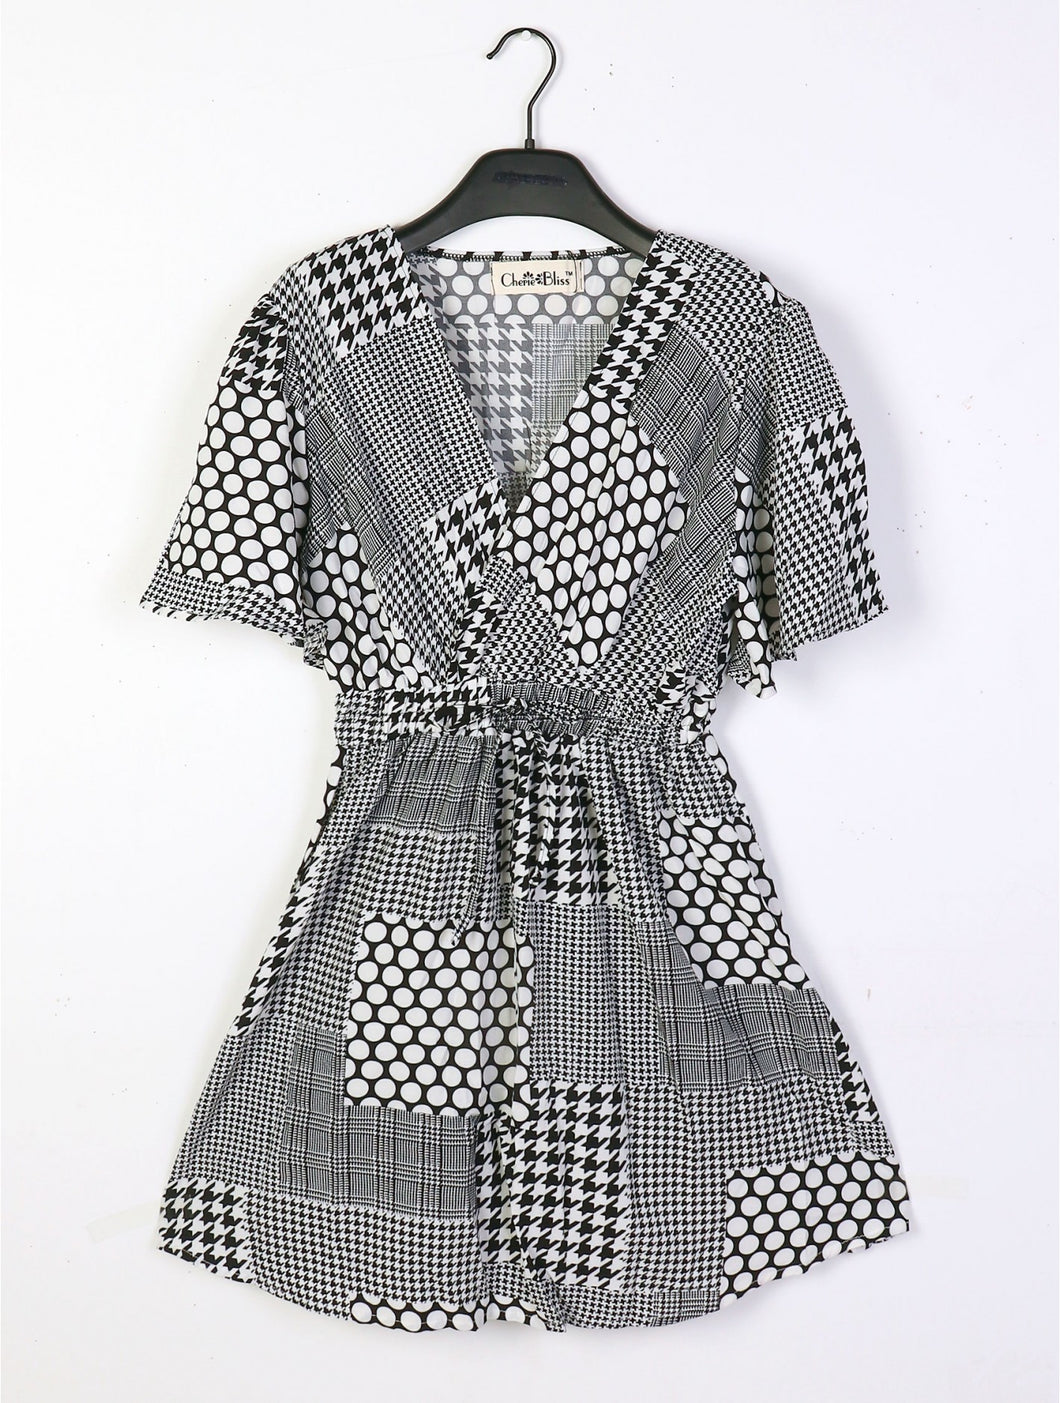 Dress -Short Sleeve Black/White Print with Cross Collar and Tie